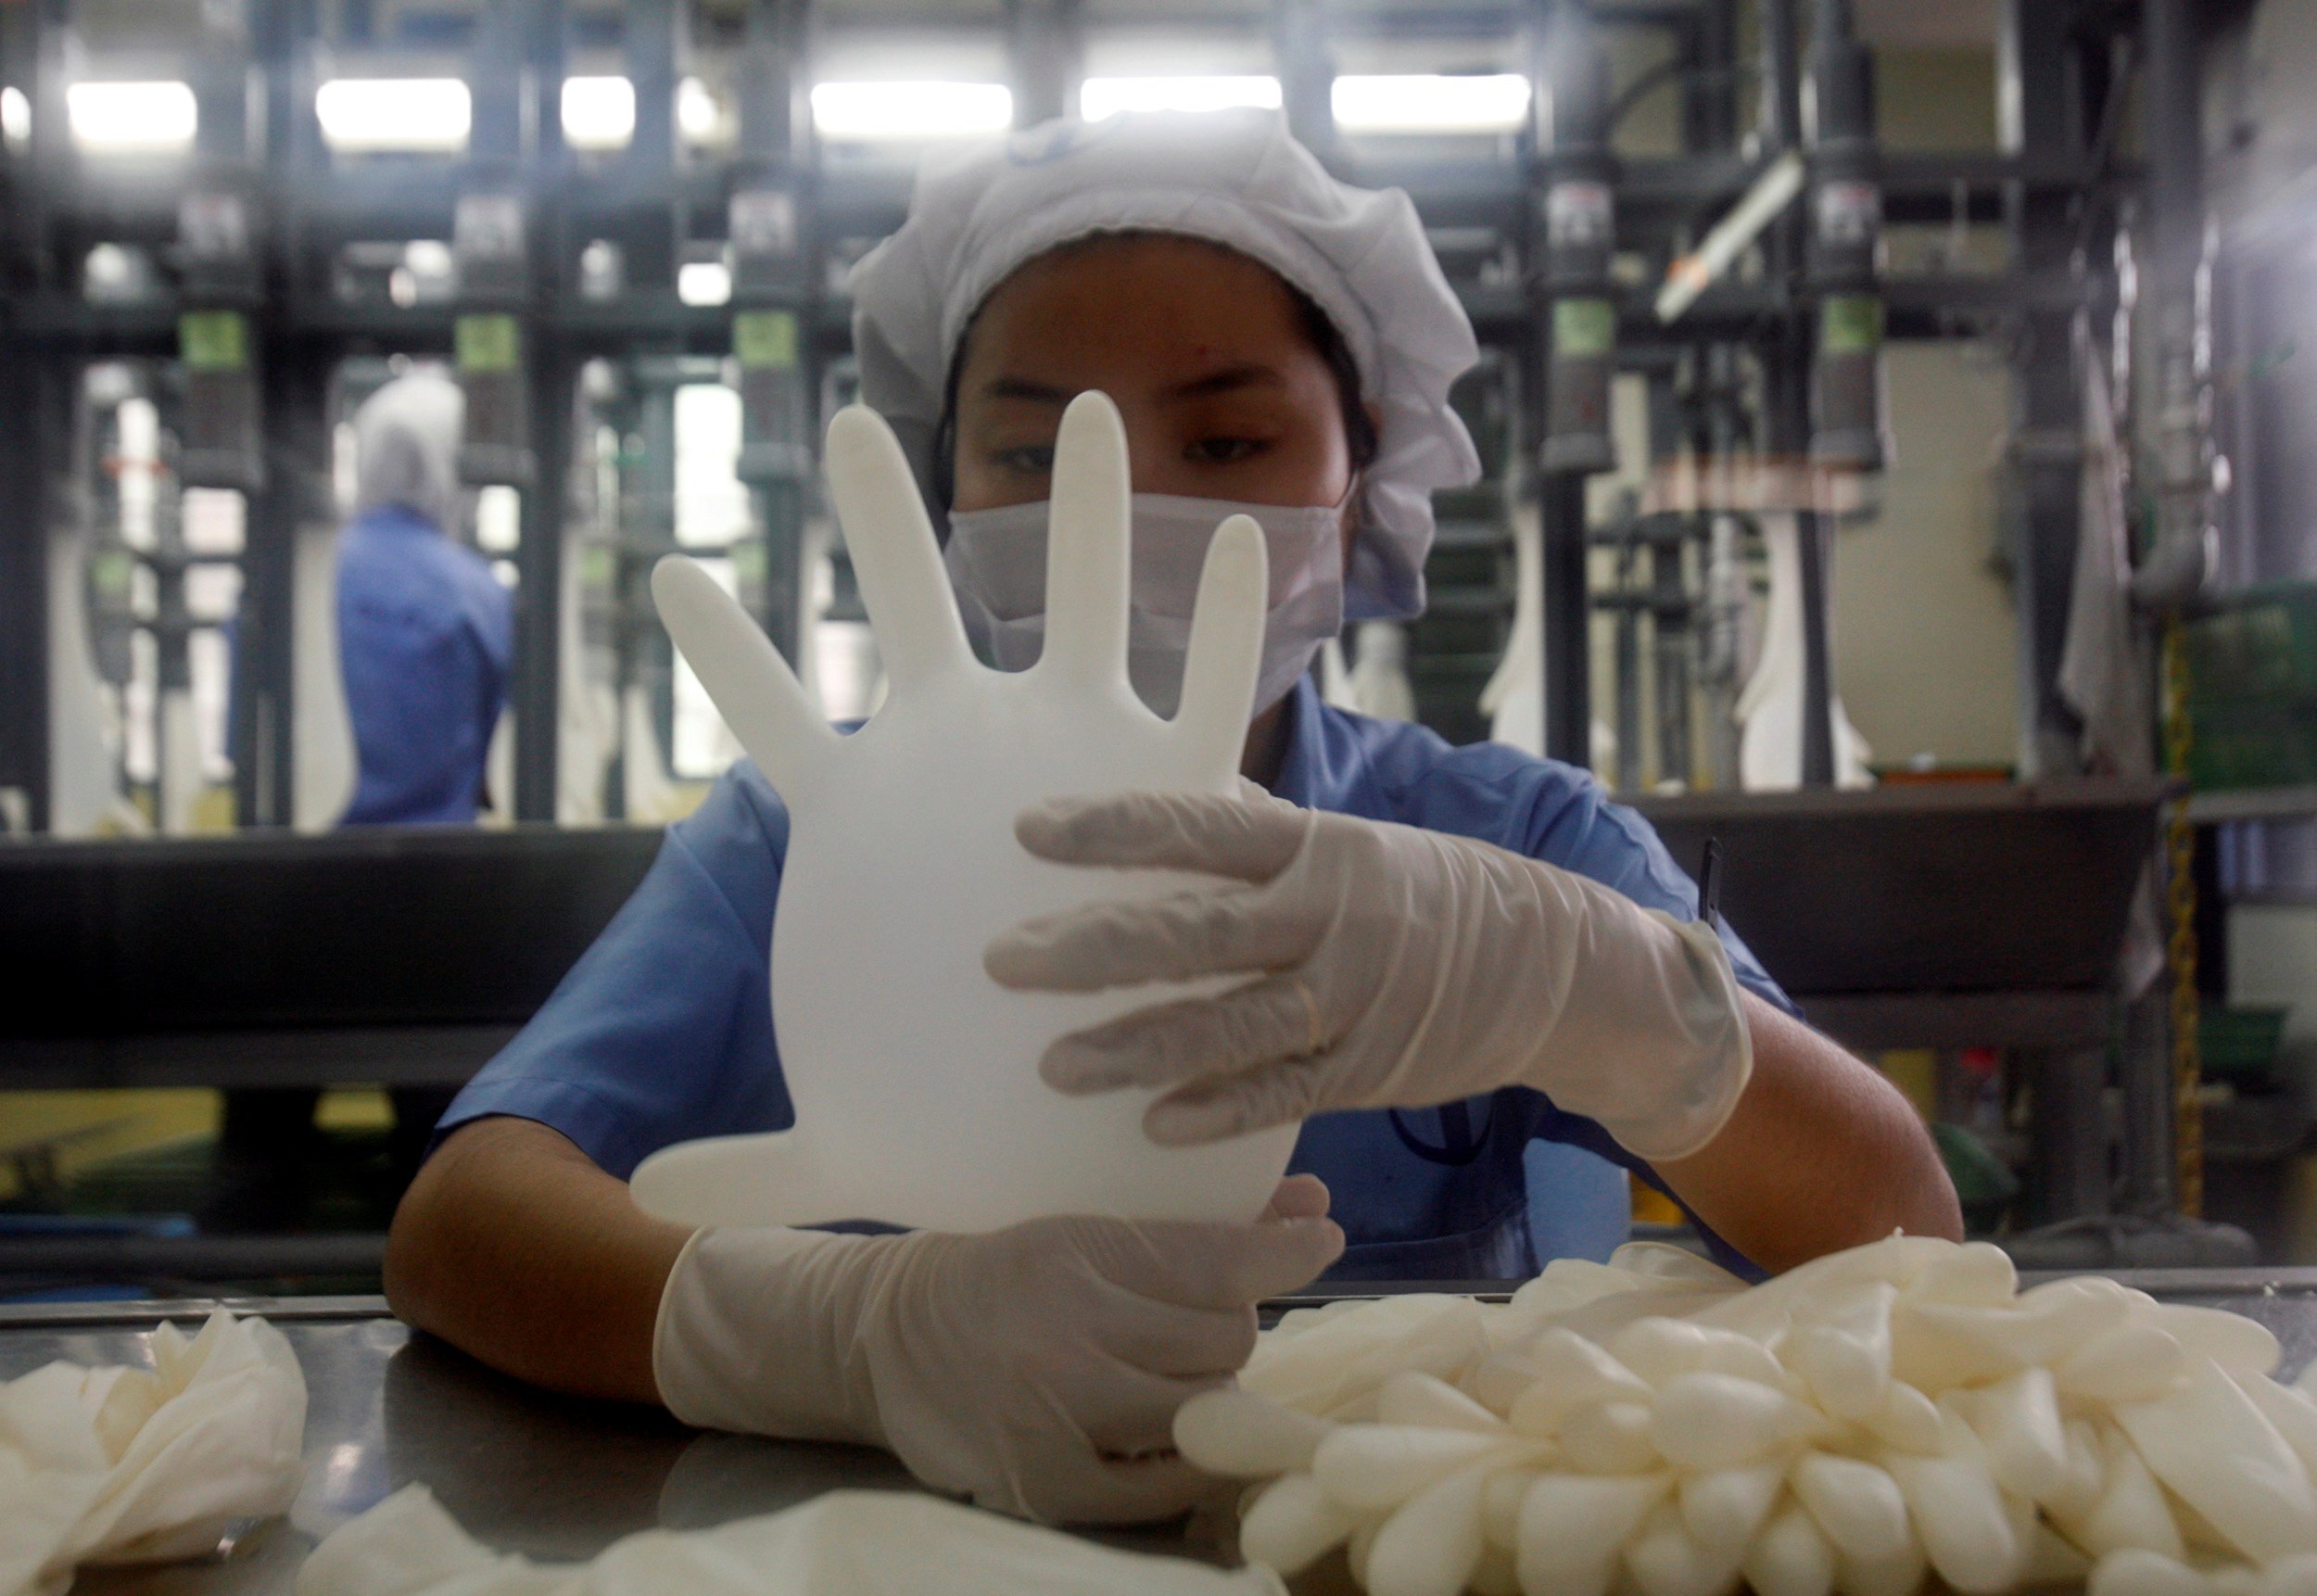 A worker carries out a test on a glove at a factory in Malaysia. Photo: Reuters